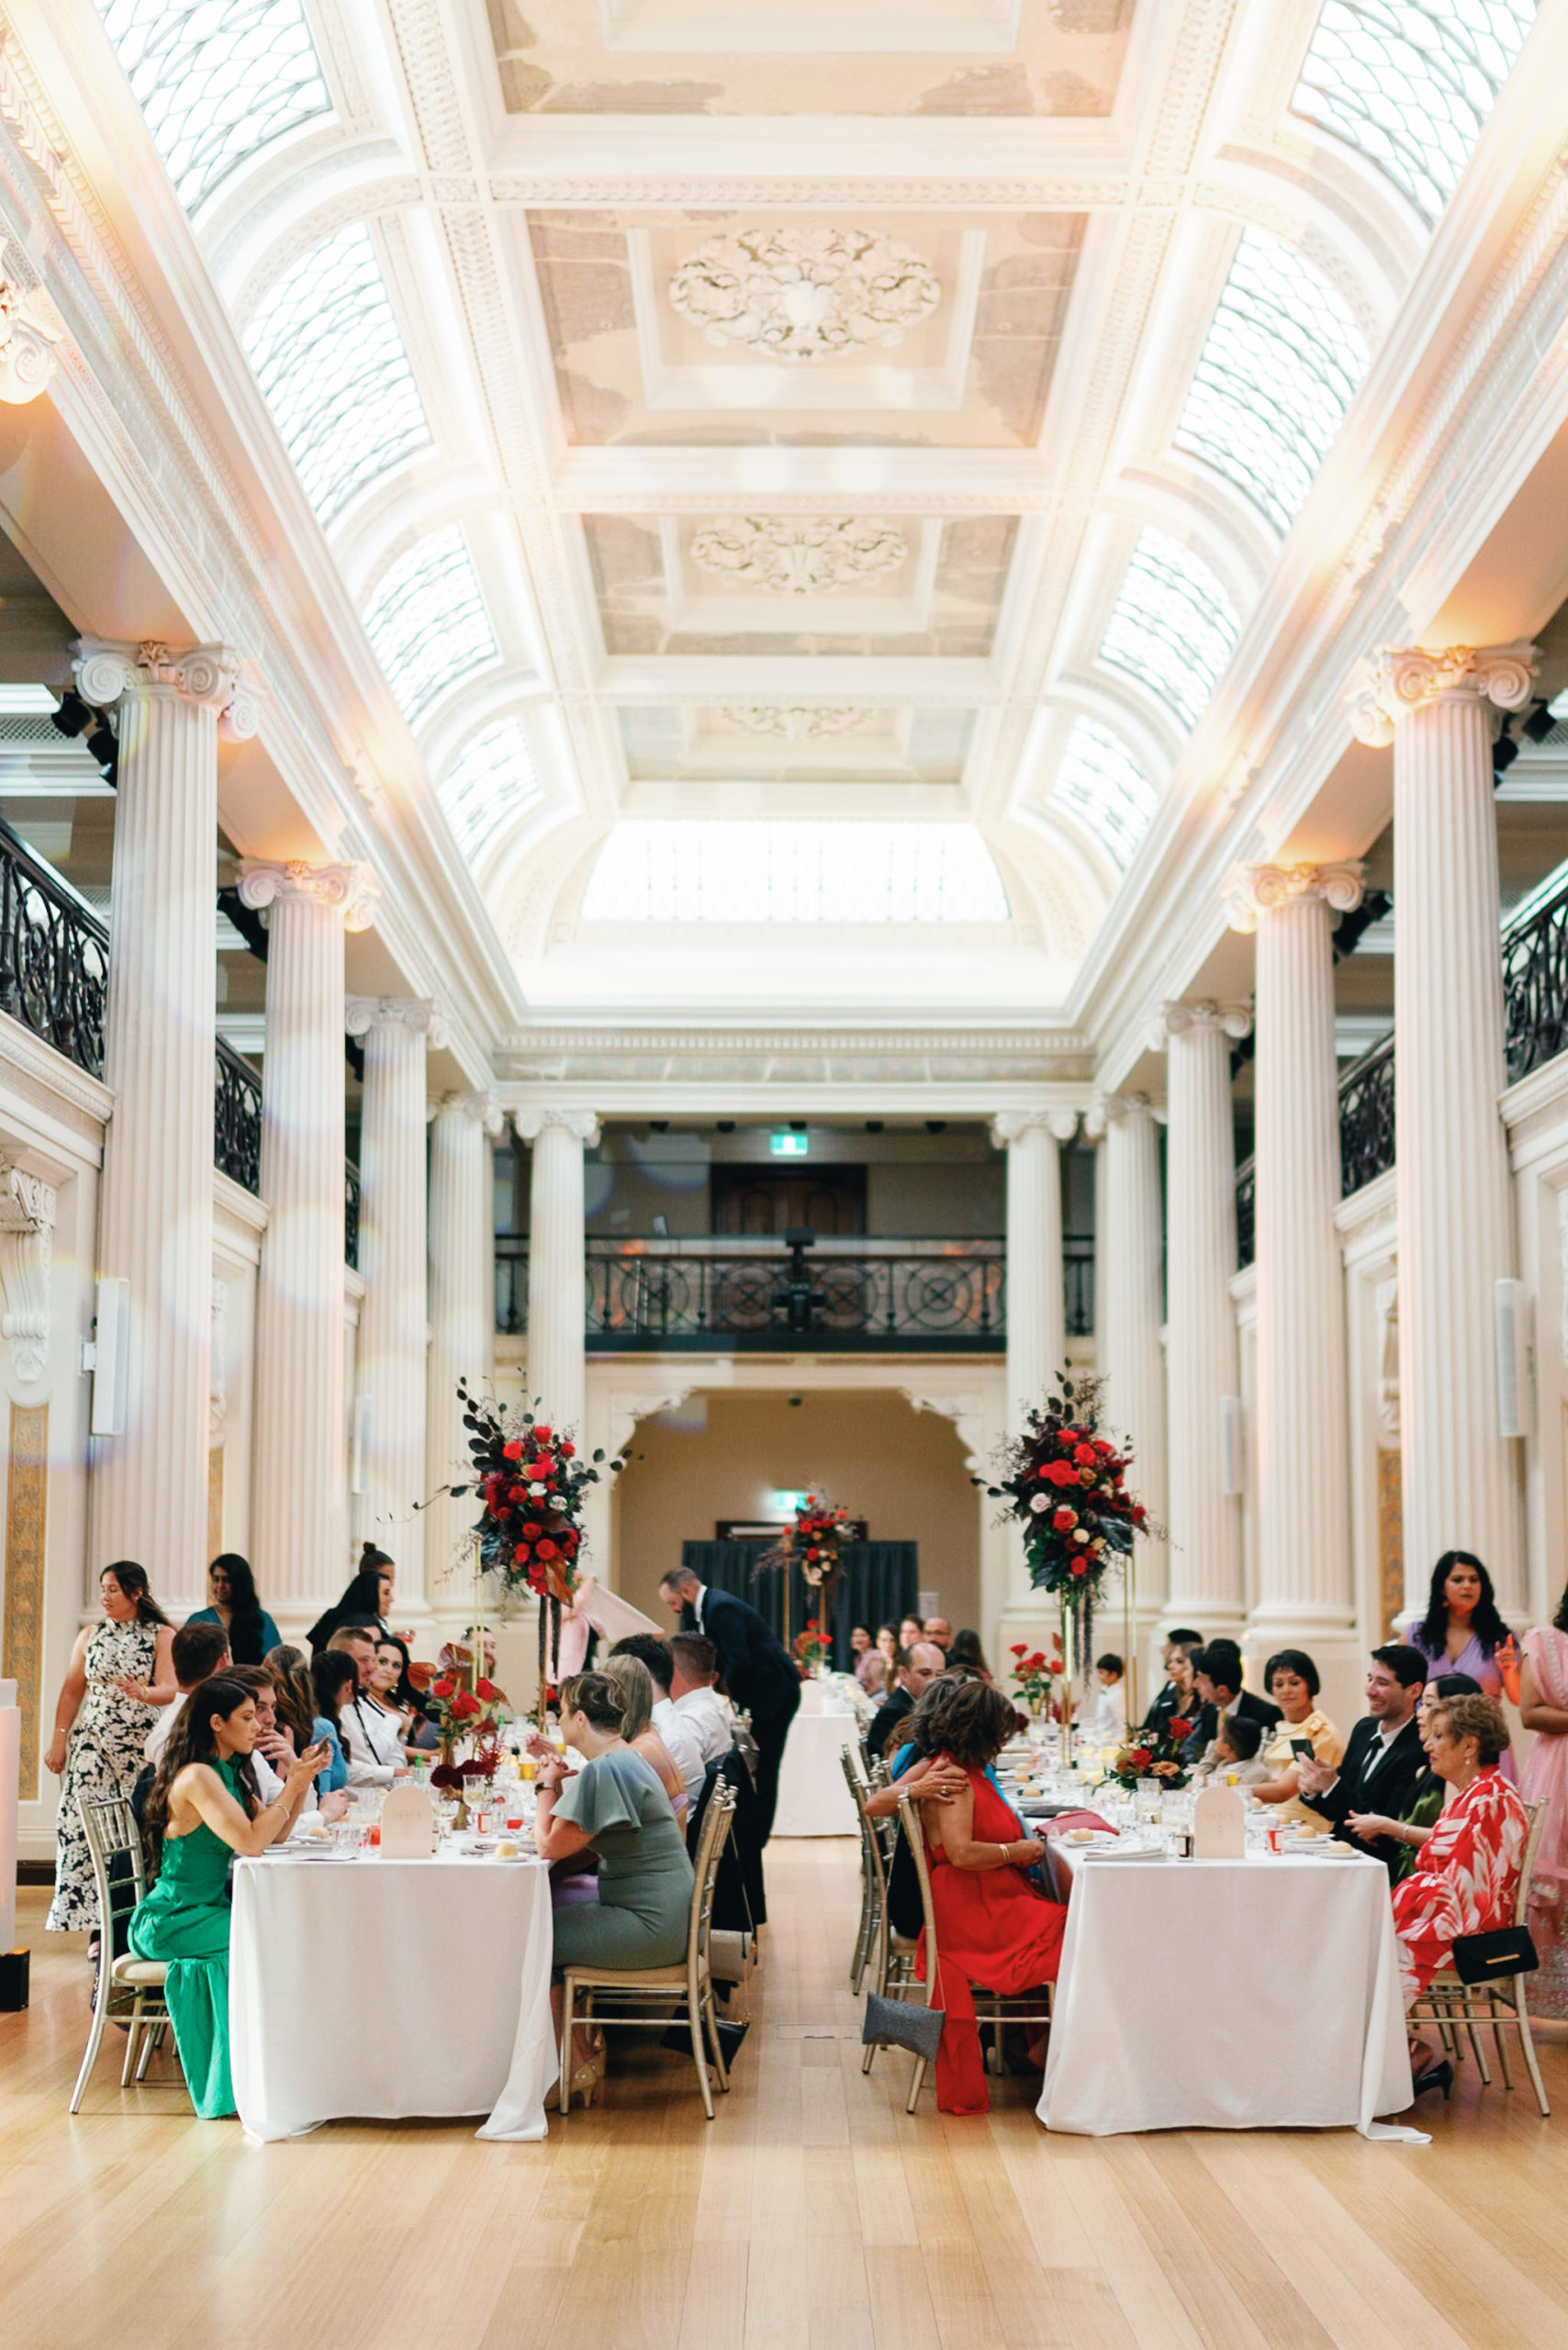 Guests being seated at a wedding reception at the State Library of Victoria